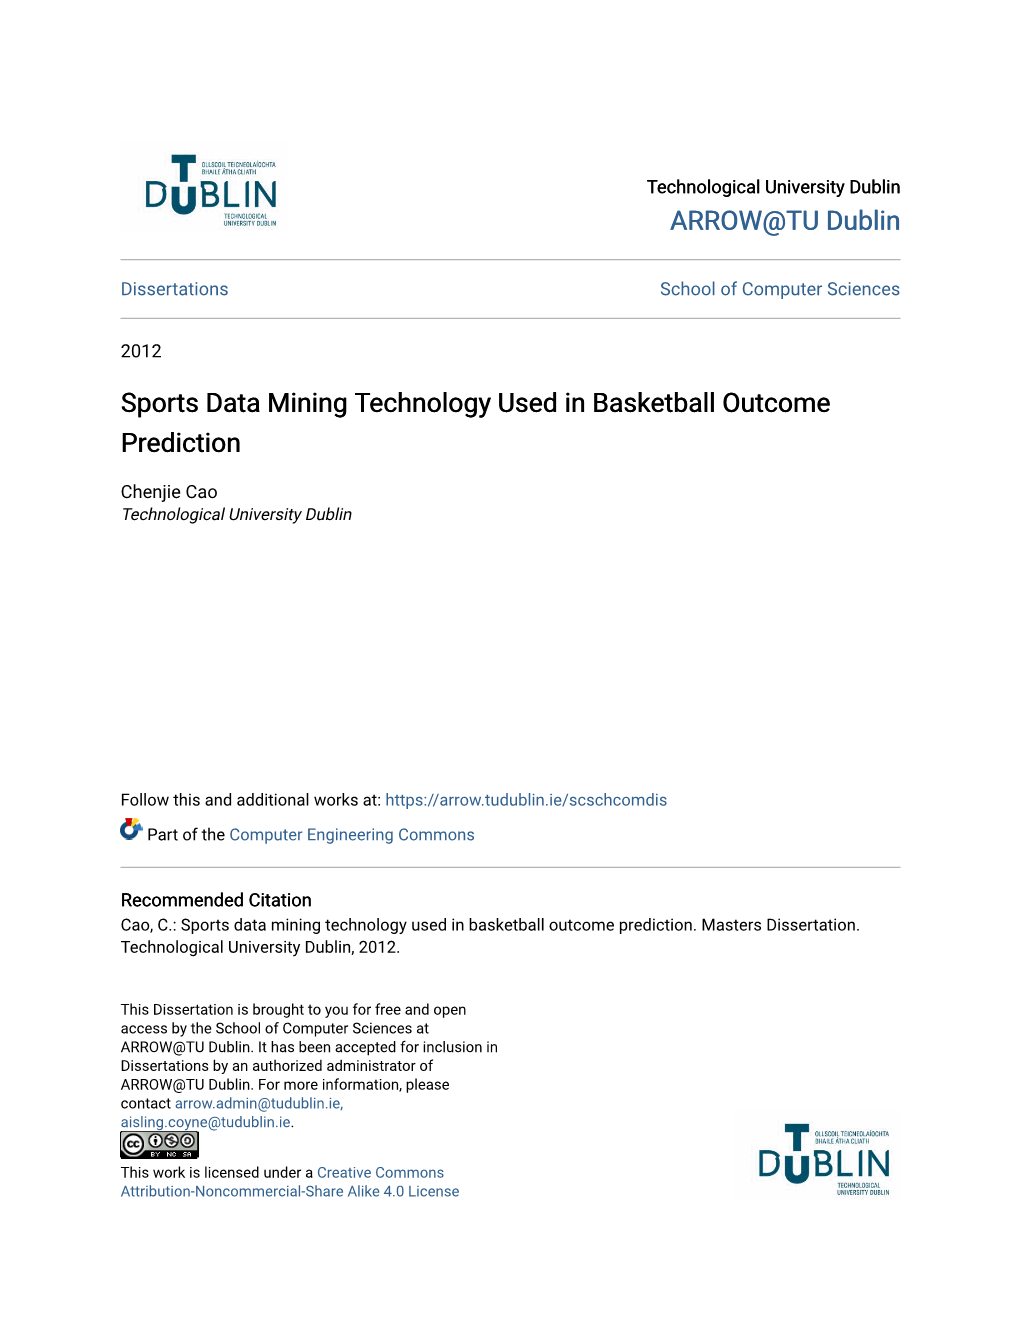 Sports Data Mining Technology Used in Basketball Outcome Prediction